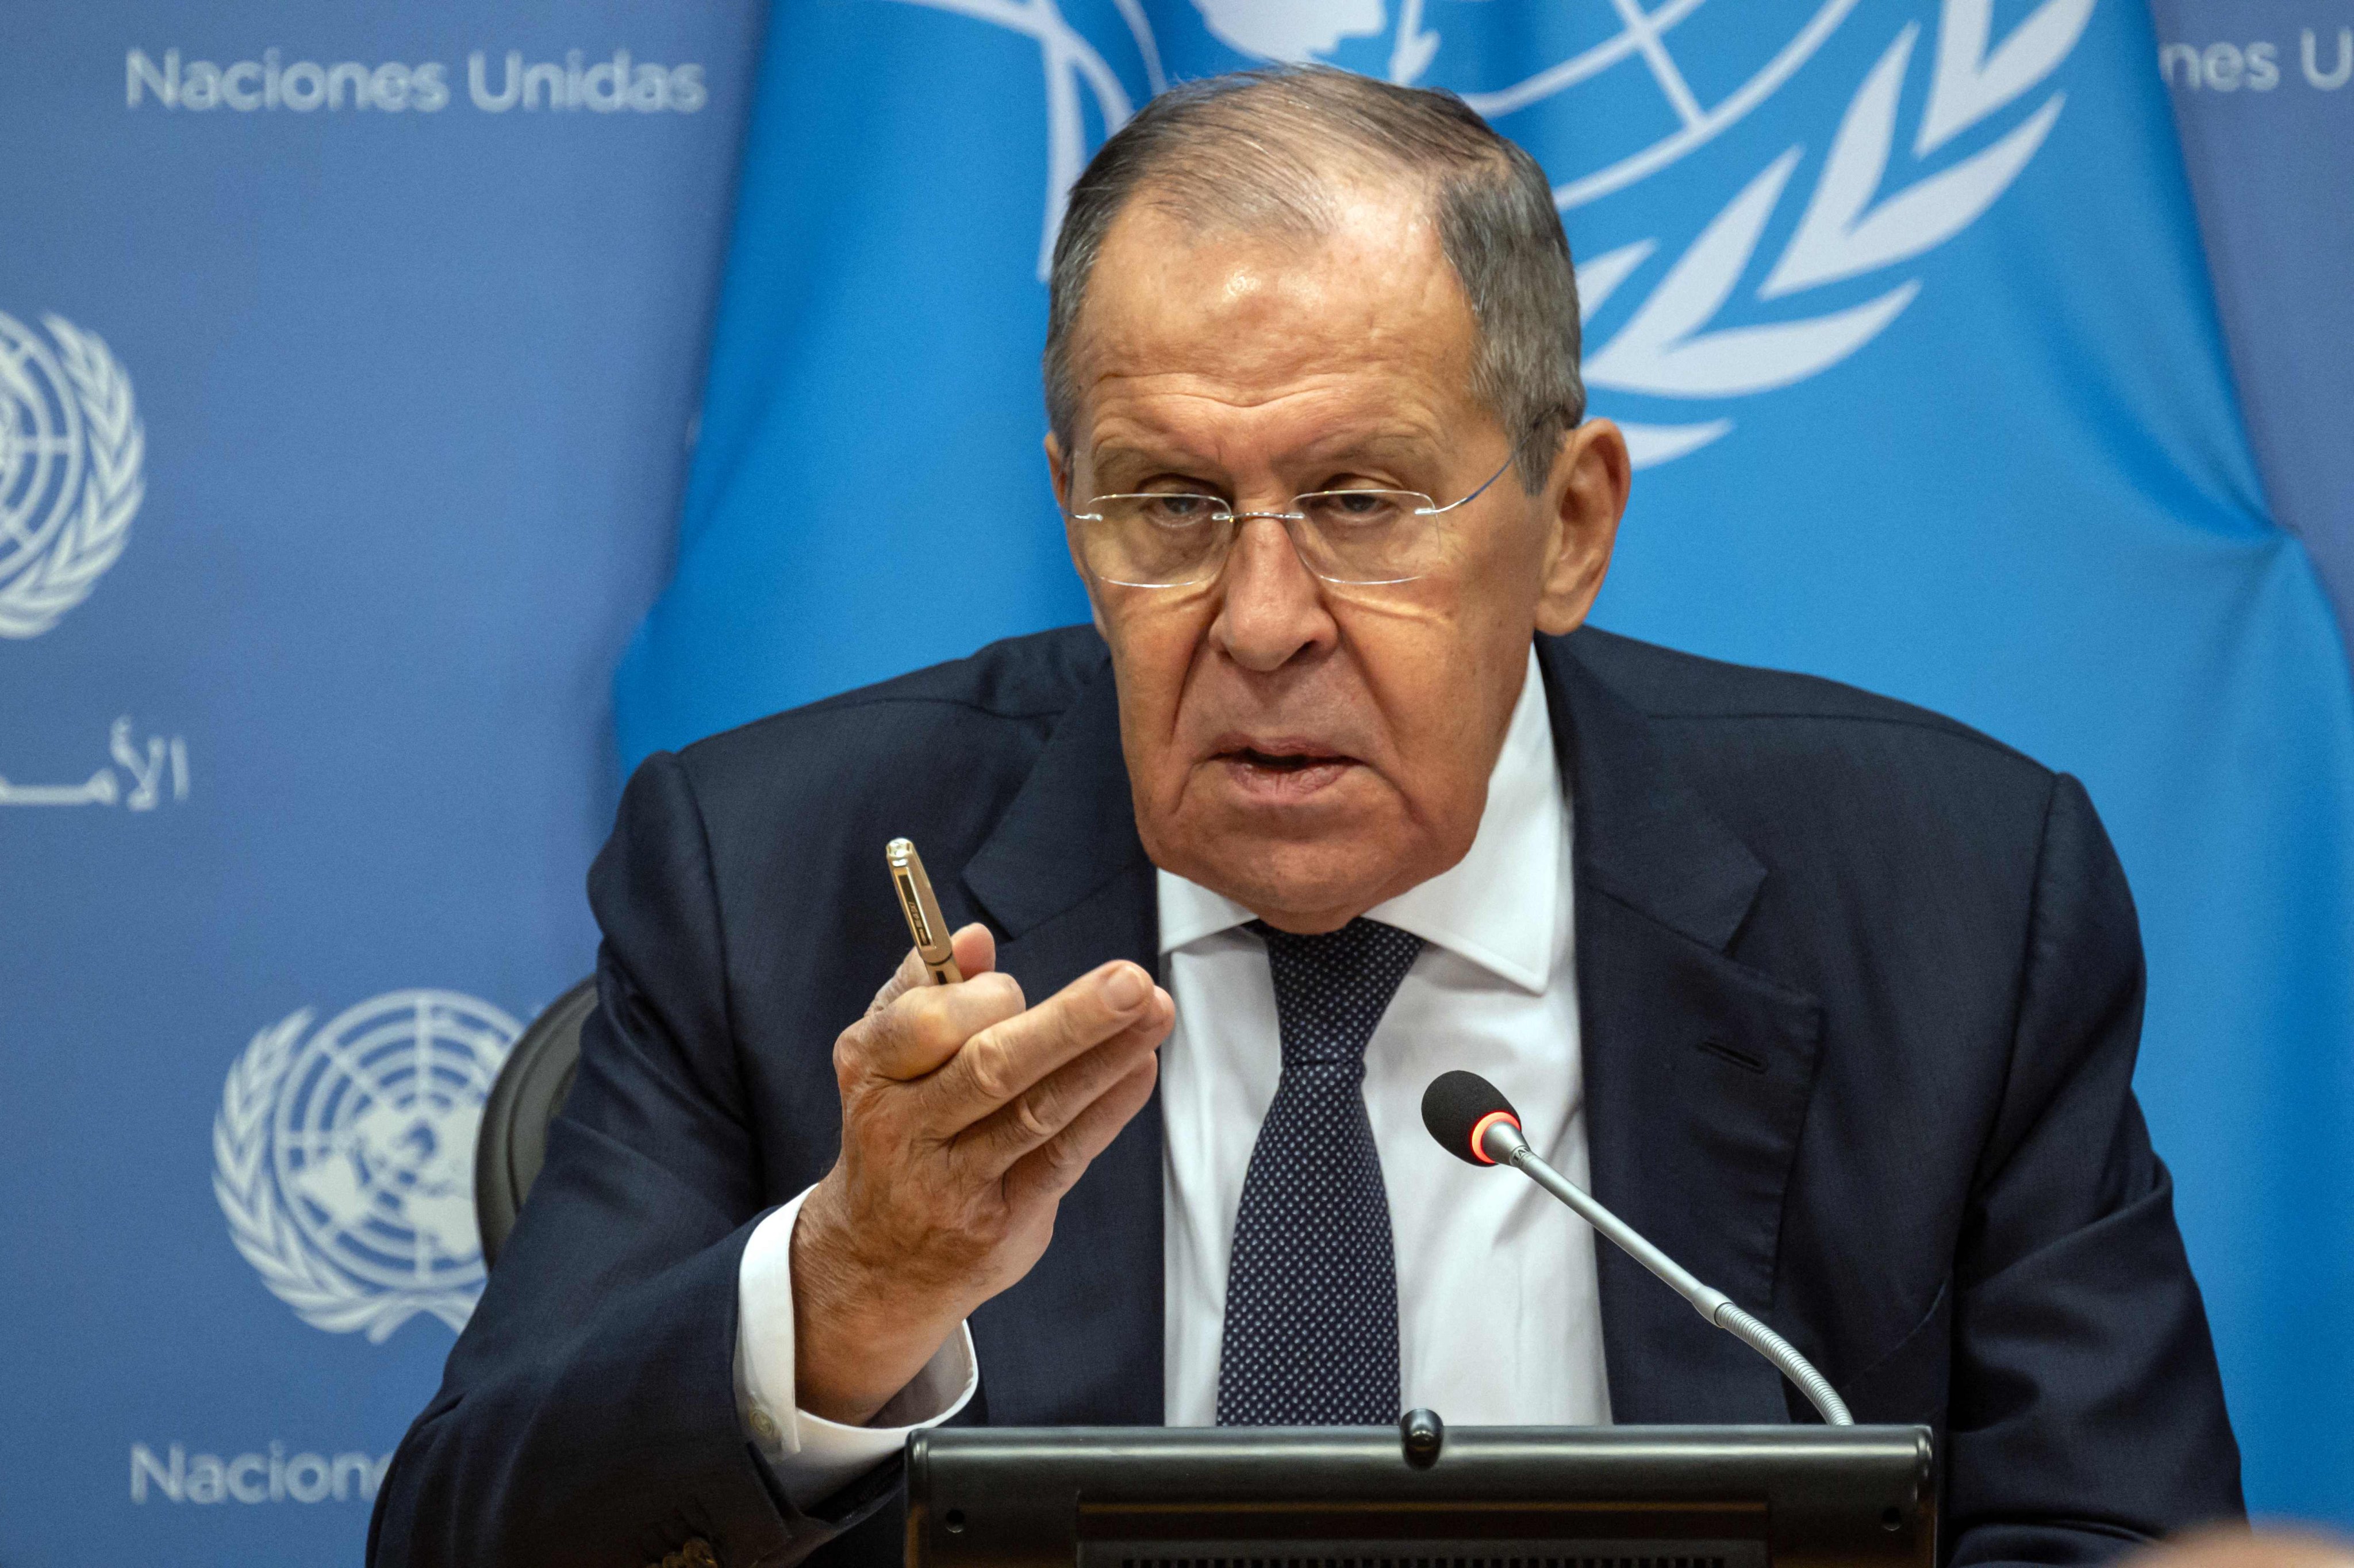 Russia’s Foreign Minister Sergey Lavrov responds to a question during a press conference following his address to the 78th United Nations General Assembly in New York on Saturday. Photo: AFP